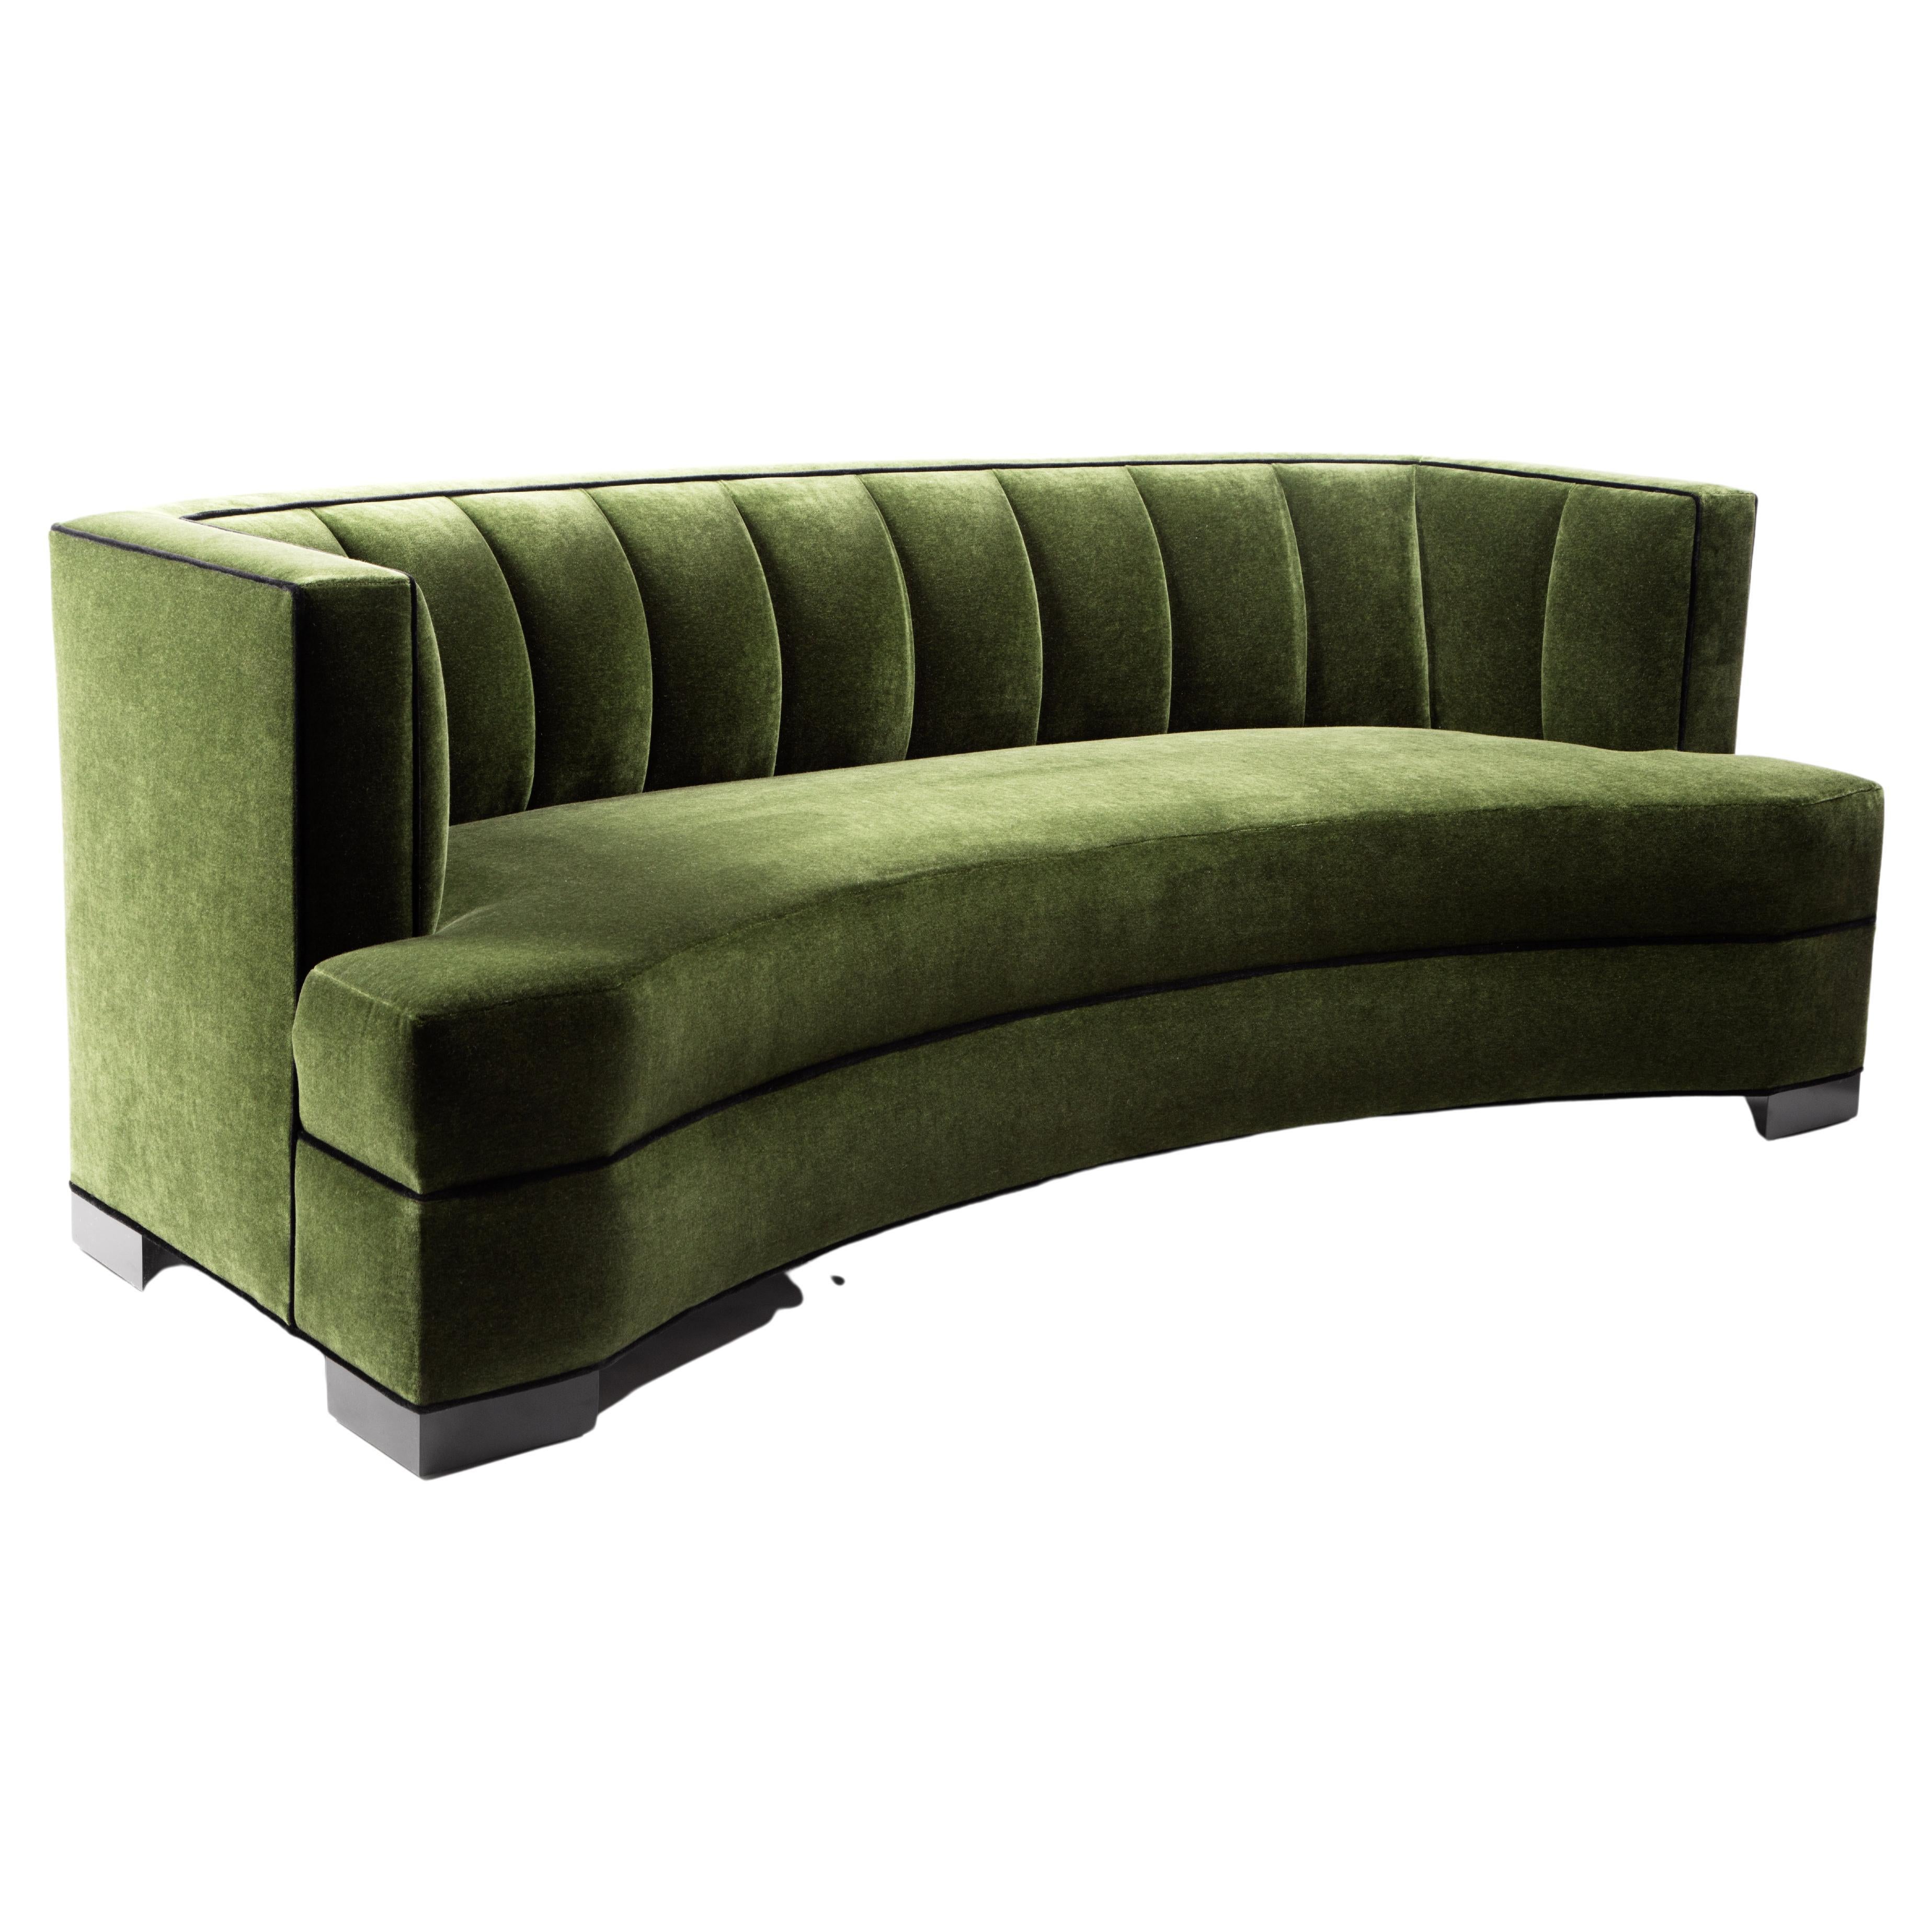 Meet Alessandra, the definition of old Hollywood glamour. From rounded back to channel-tufting, her curves embrace as you relax on her stunning frame. Whether clothed in velvet, wool or mohair, this sleek sofa adds refinement and class to any